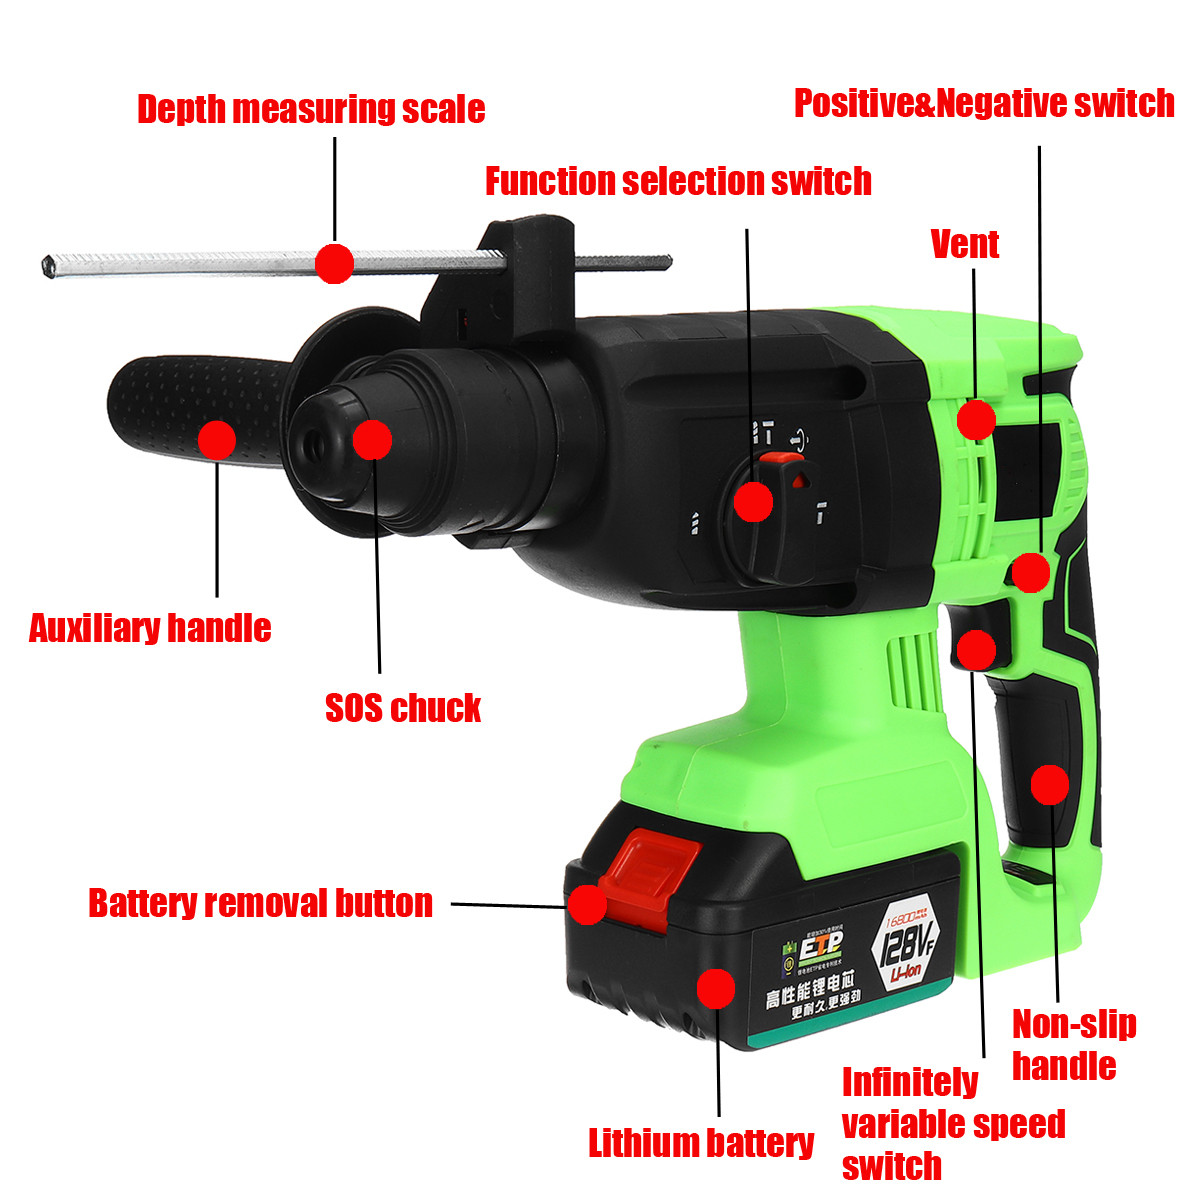 128VF-16800mAh-Brushless-Electric-Cordless-Impact-Hammer-High-Torque-Drill-with-Rechargeable-Battery-1522123-4